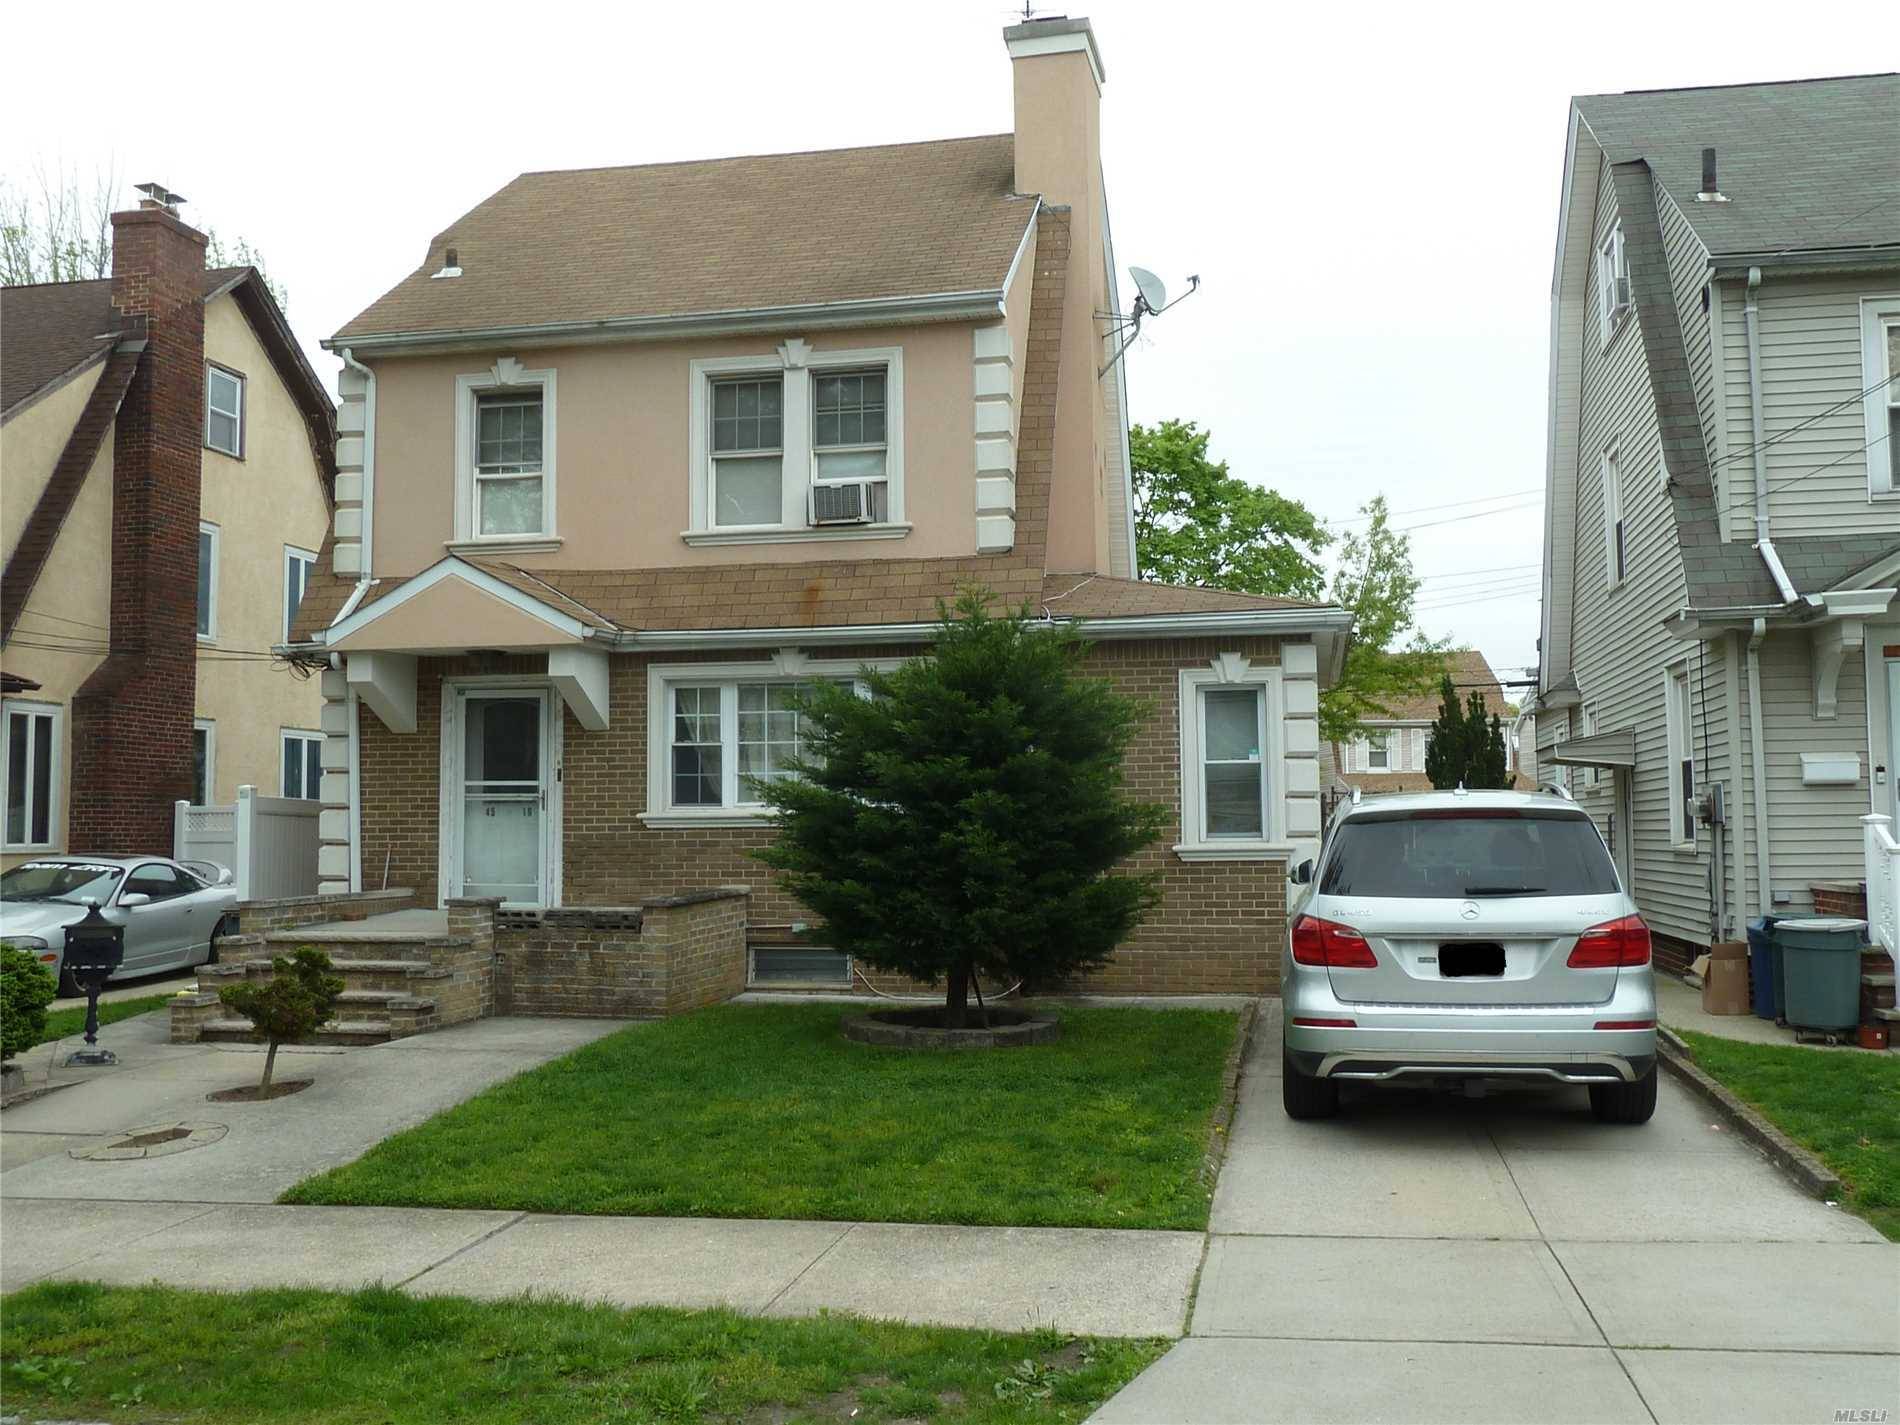 2 Family House Situated In The Heart Of Flushing.